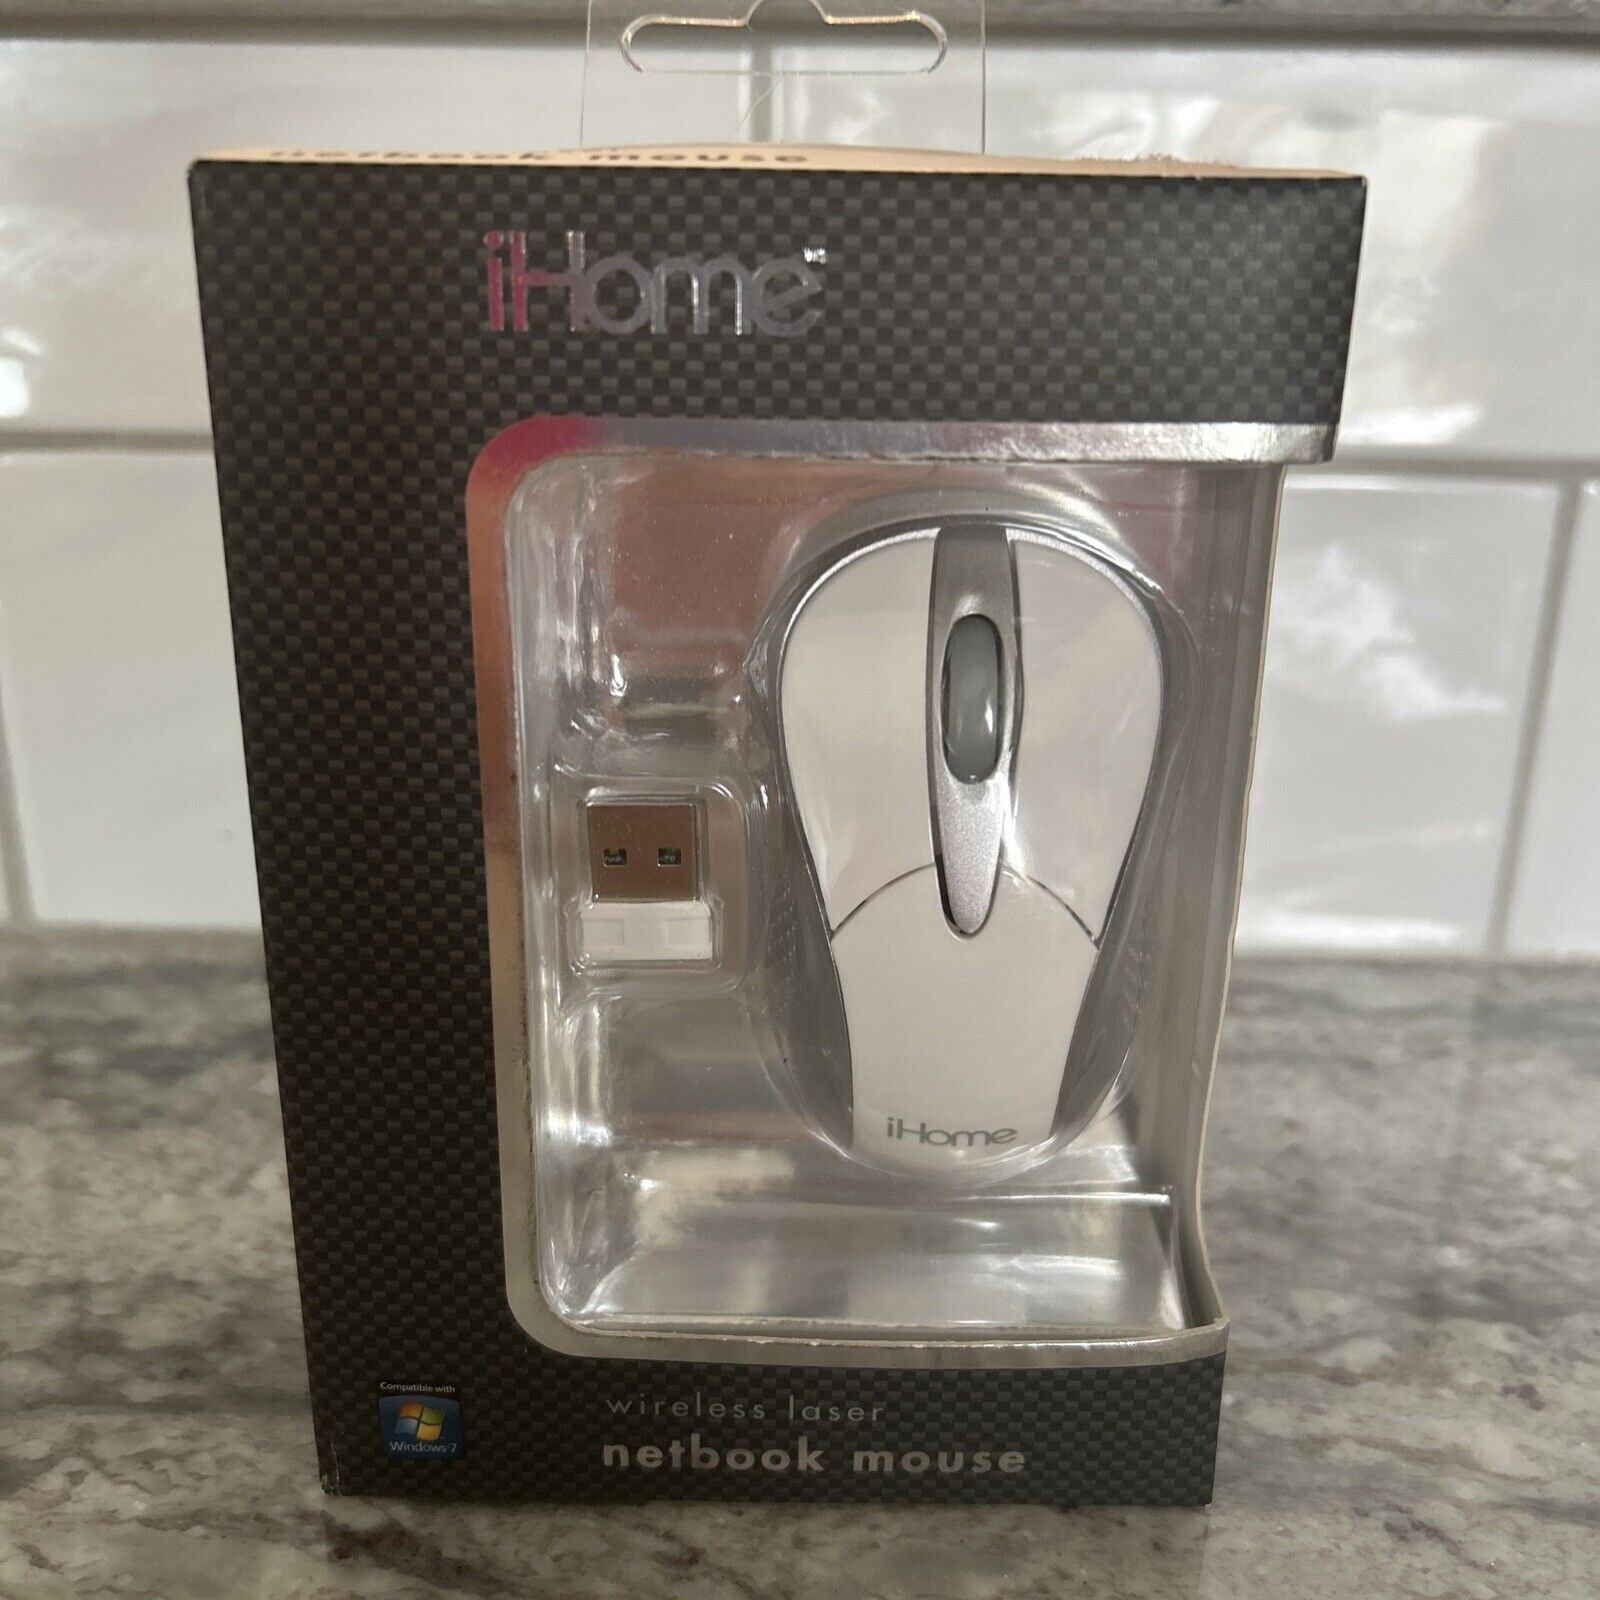 IHOME Wireless Laser Netbook Mouse - White And Gray - NEW - Model IH-M183ZW (L)